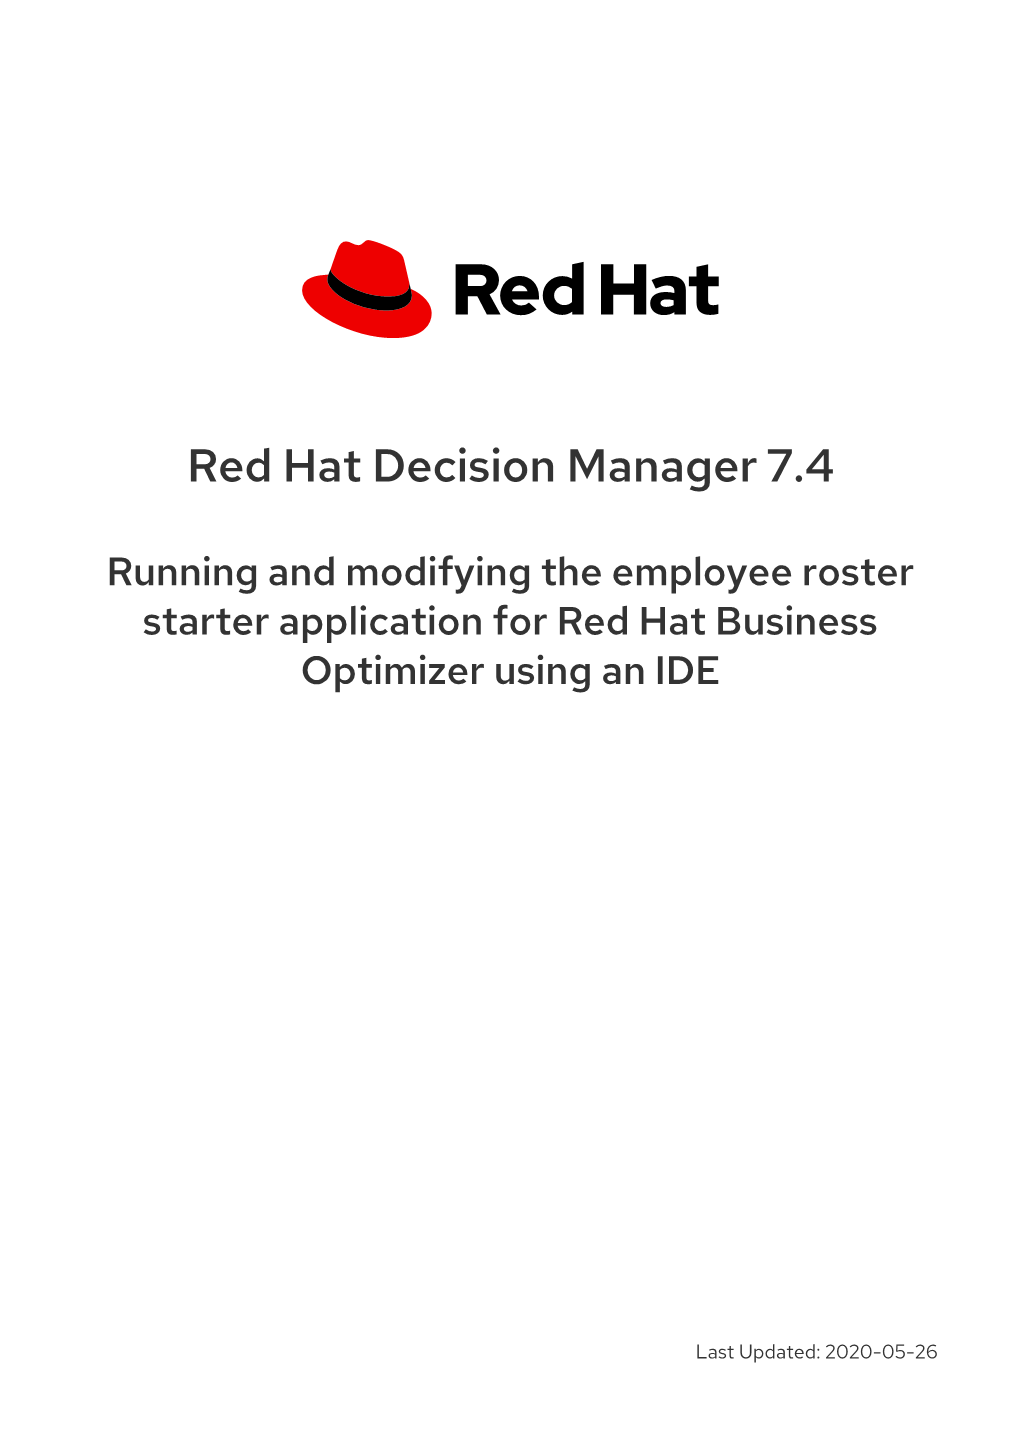 Red Hat Decision Manager 7.4 Running and Modifying the Employee Roster Starter Application for Red Hat Business Optimizer Using an IDE